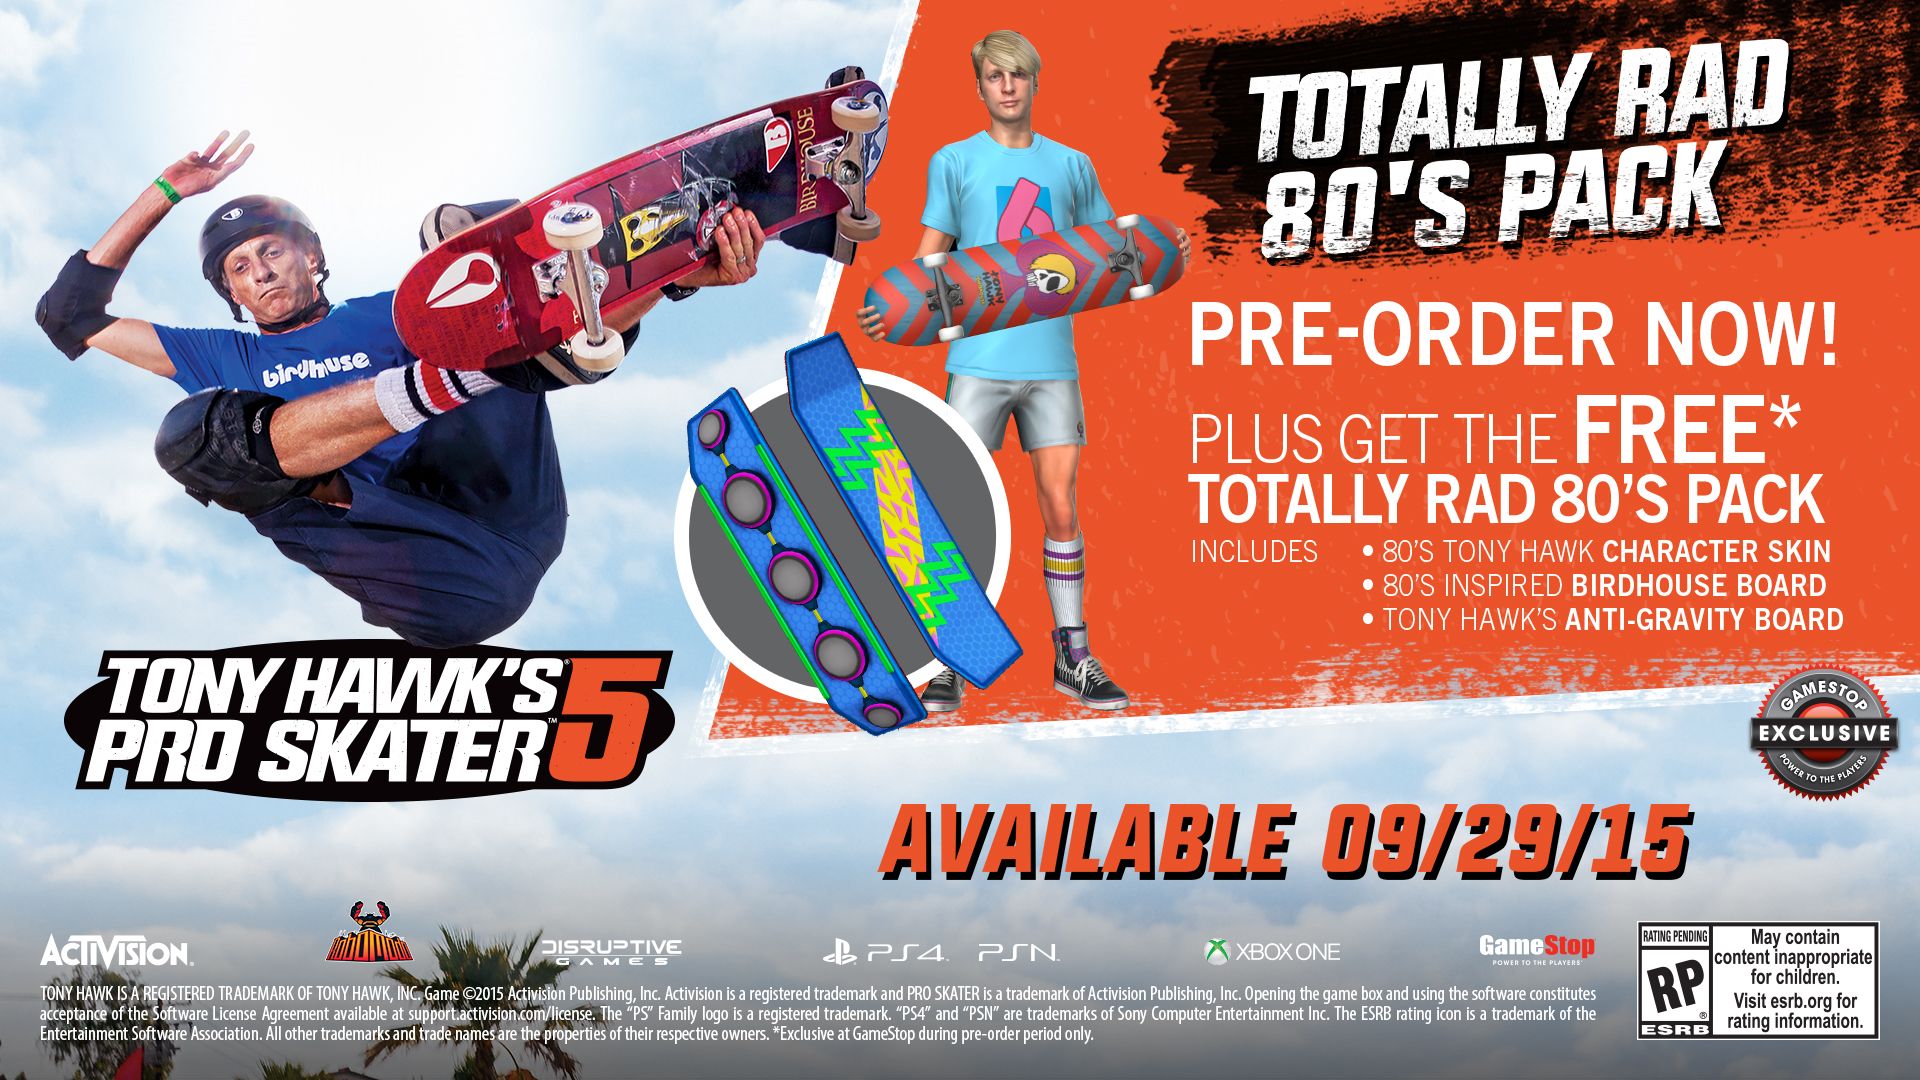 Image for Take a look behind the Tony Hawk's Pro Skater 5 curtain with this video